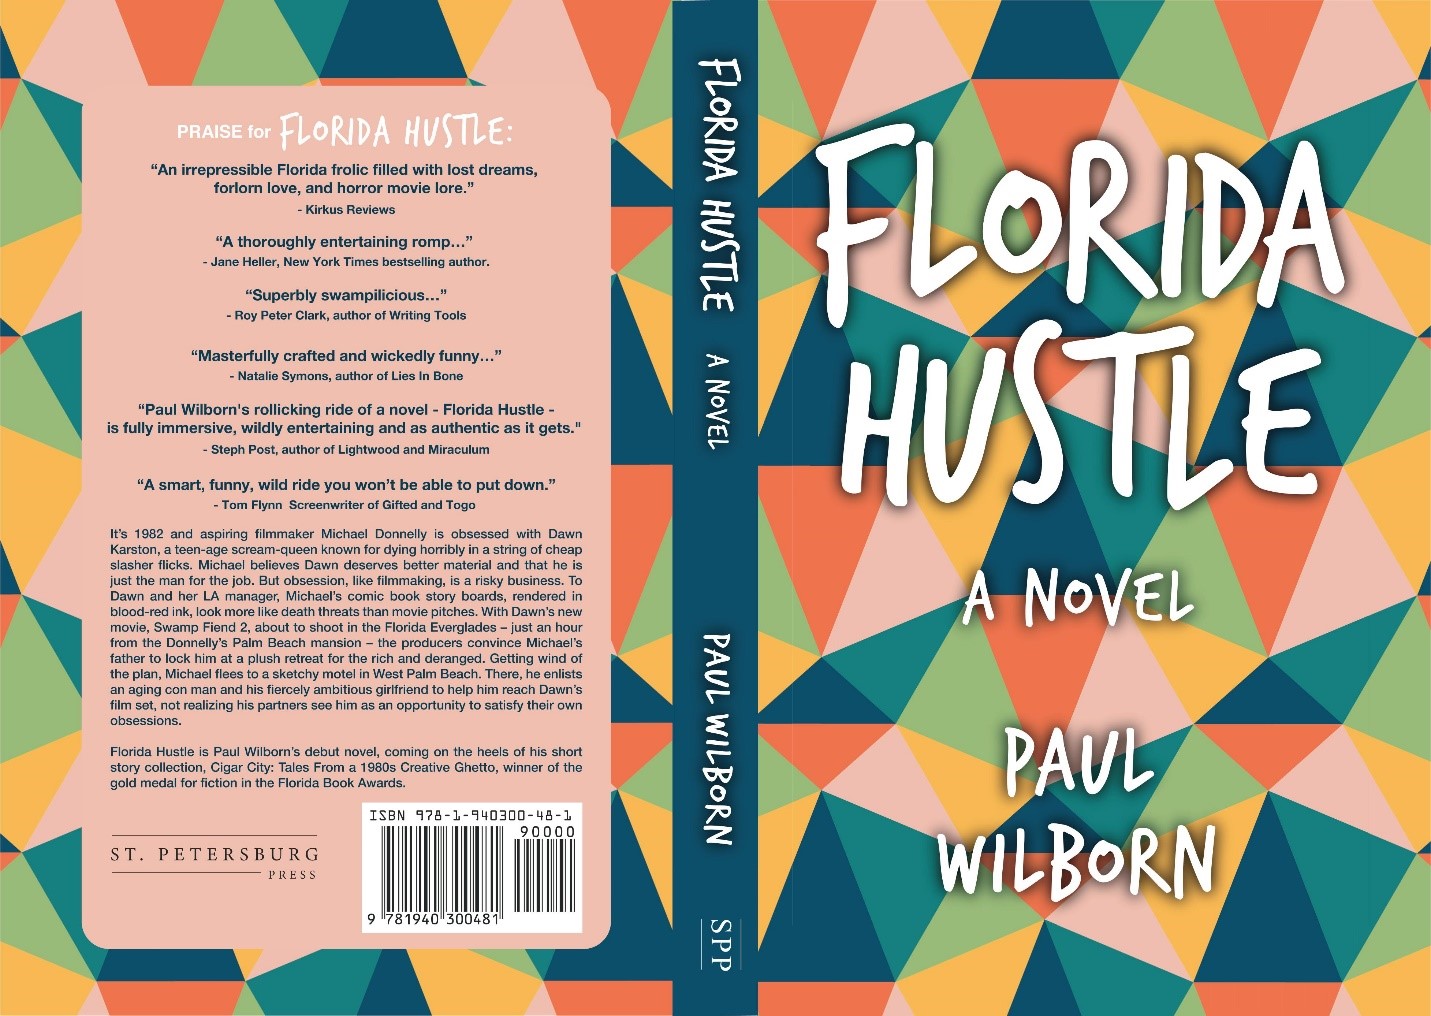 Hustling in the Sunshine State: A Humorous Tale of Coming-of-Age by Paul Wilborn 